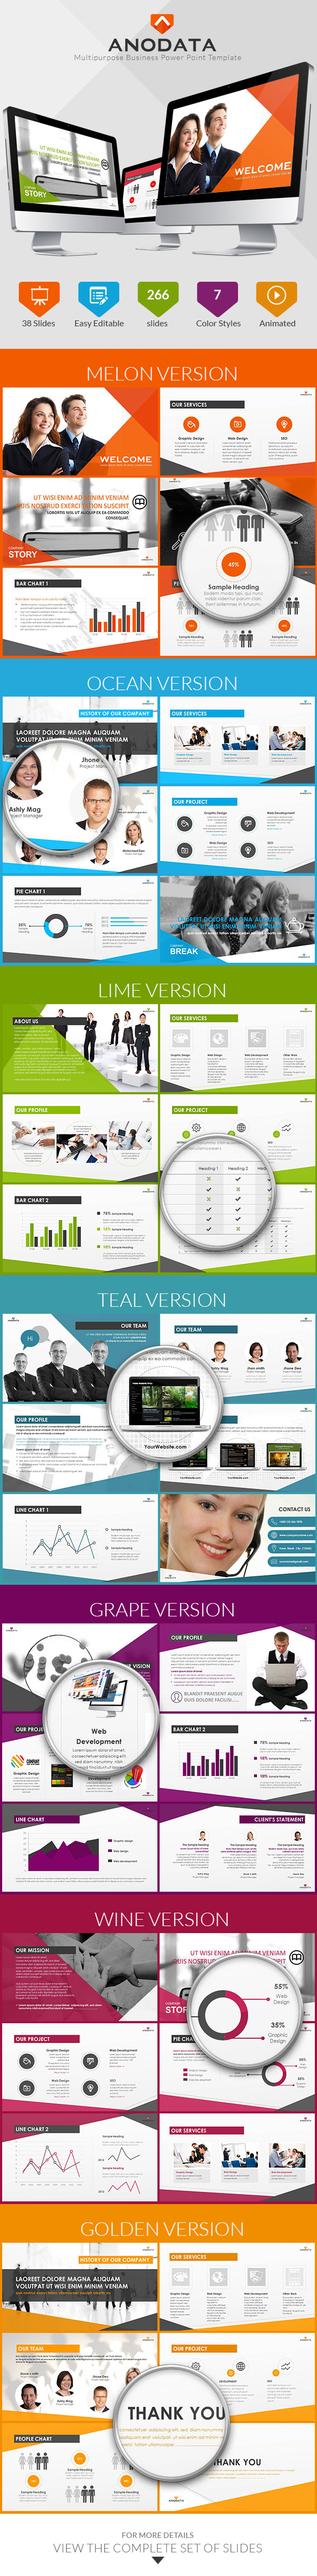 Multipurpose Business Power Point Template